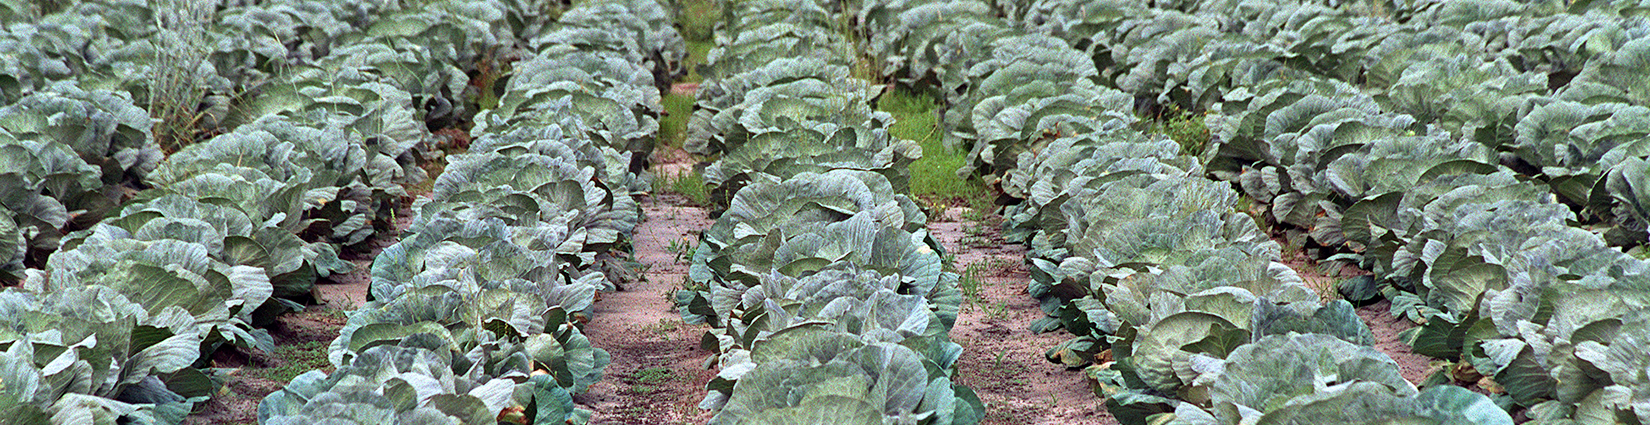 rows of cabbage in field